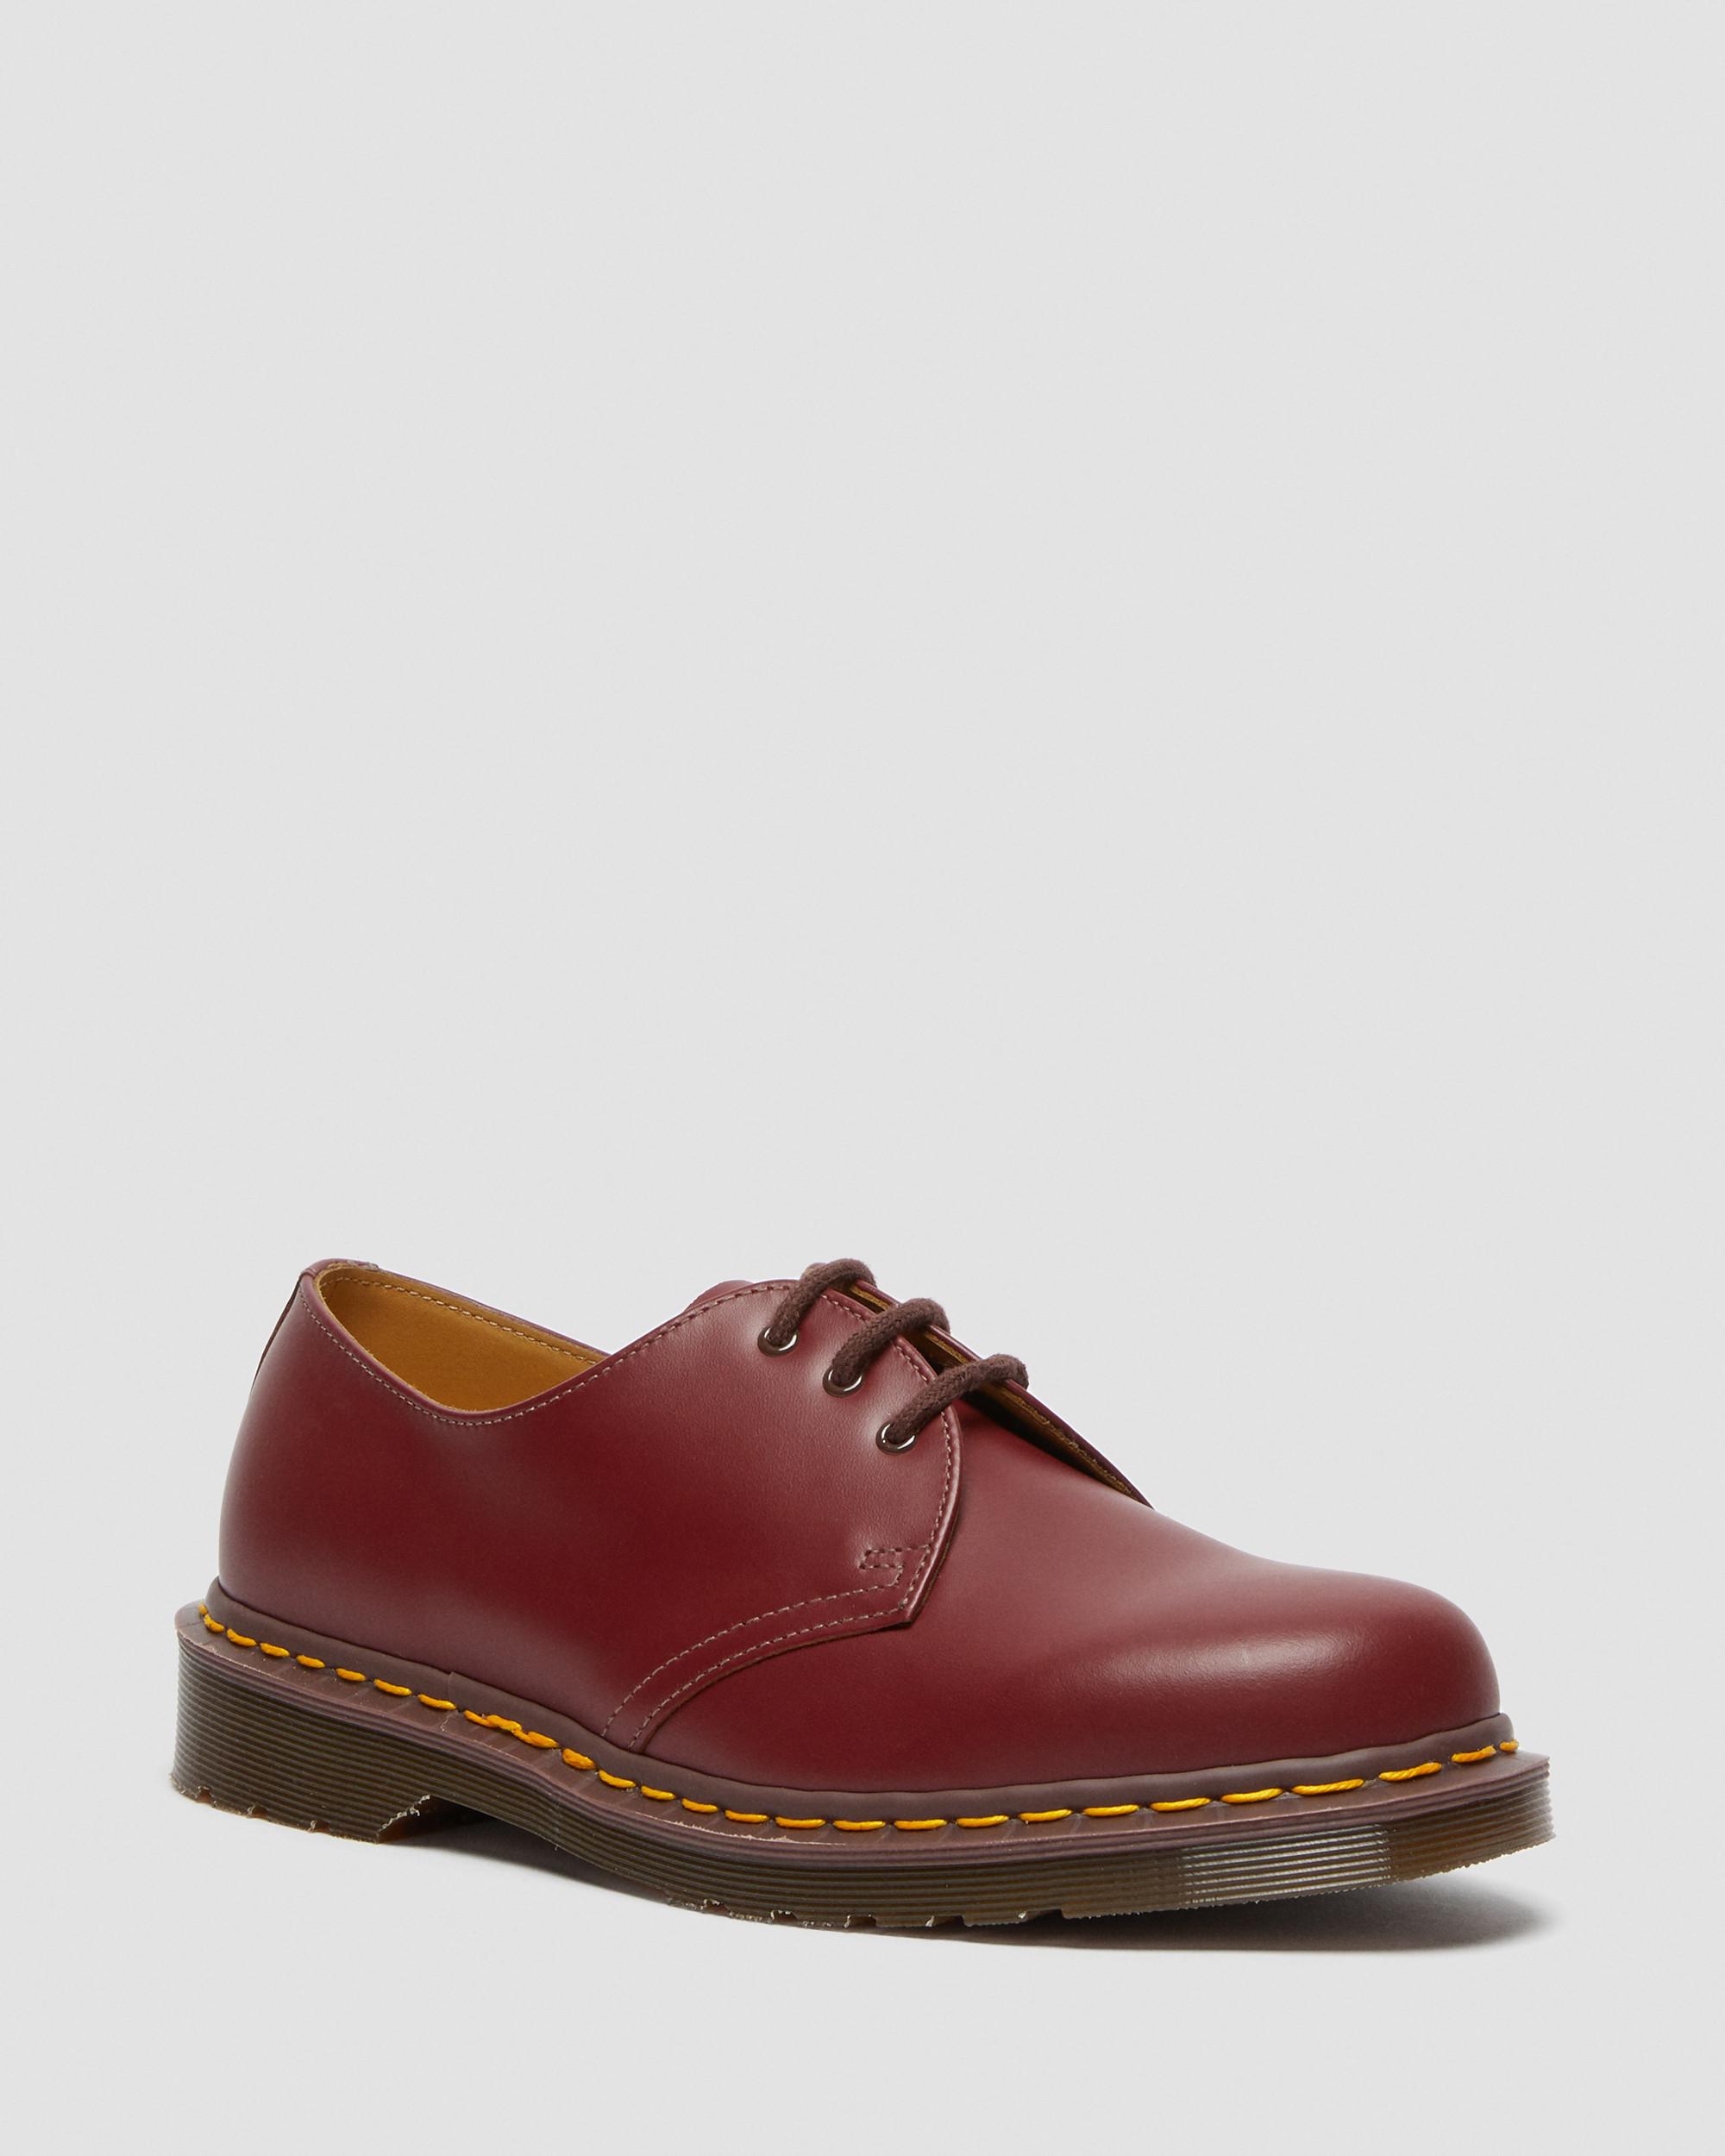 1461 Vintage Made in England Oxford Shoes in Red | Dr. Martens